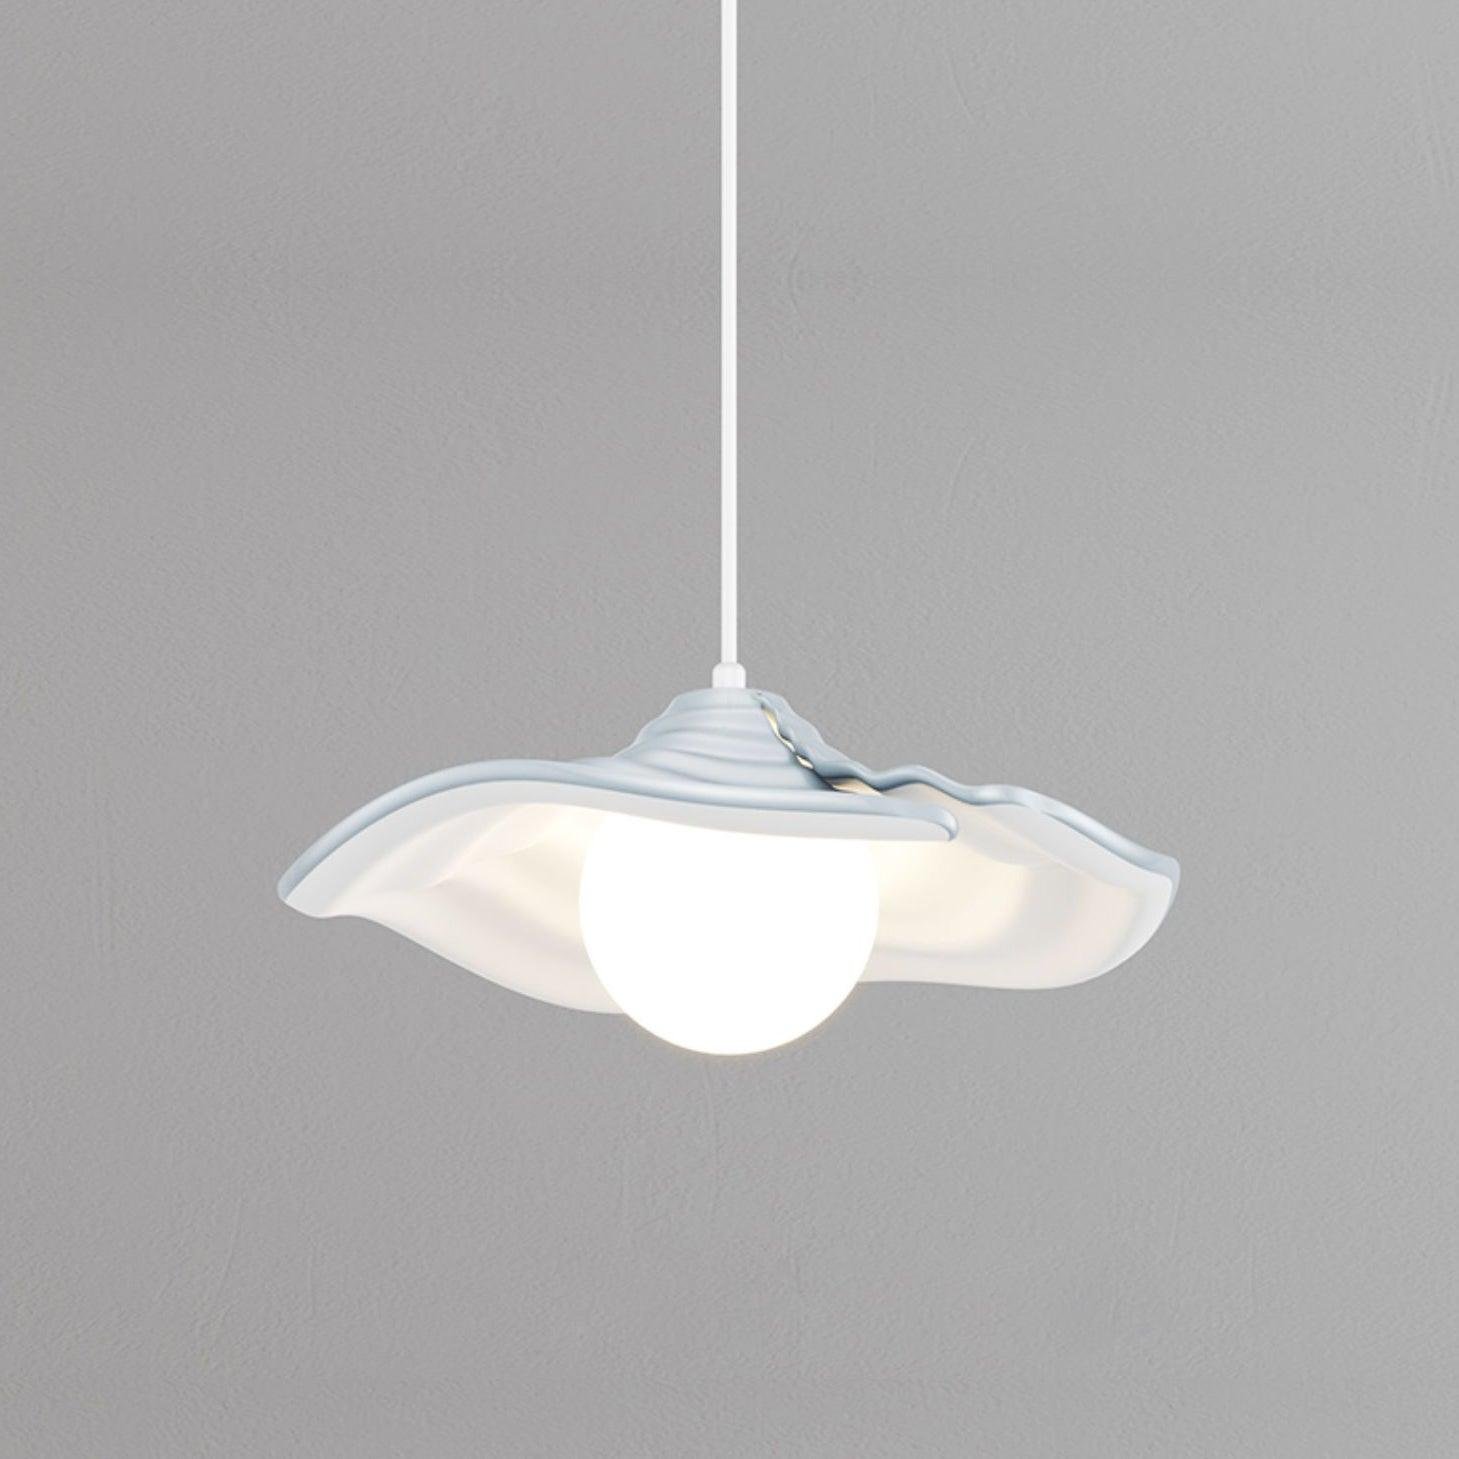 Pendant Light: White Hat Design with Cool Light, 11.8" Diameter and 5.9" Height (30cm x 15cm)